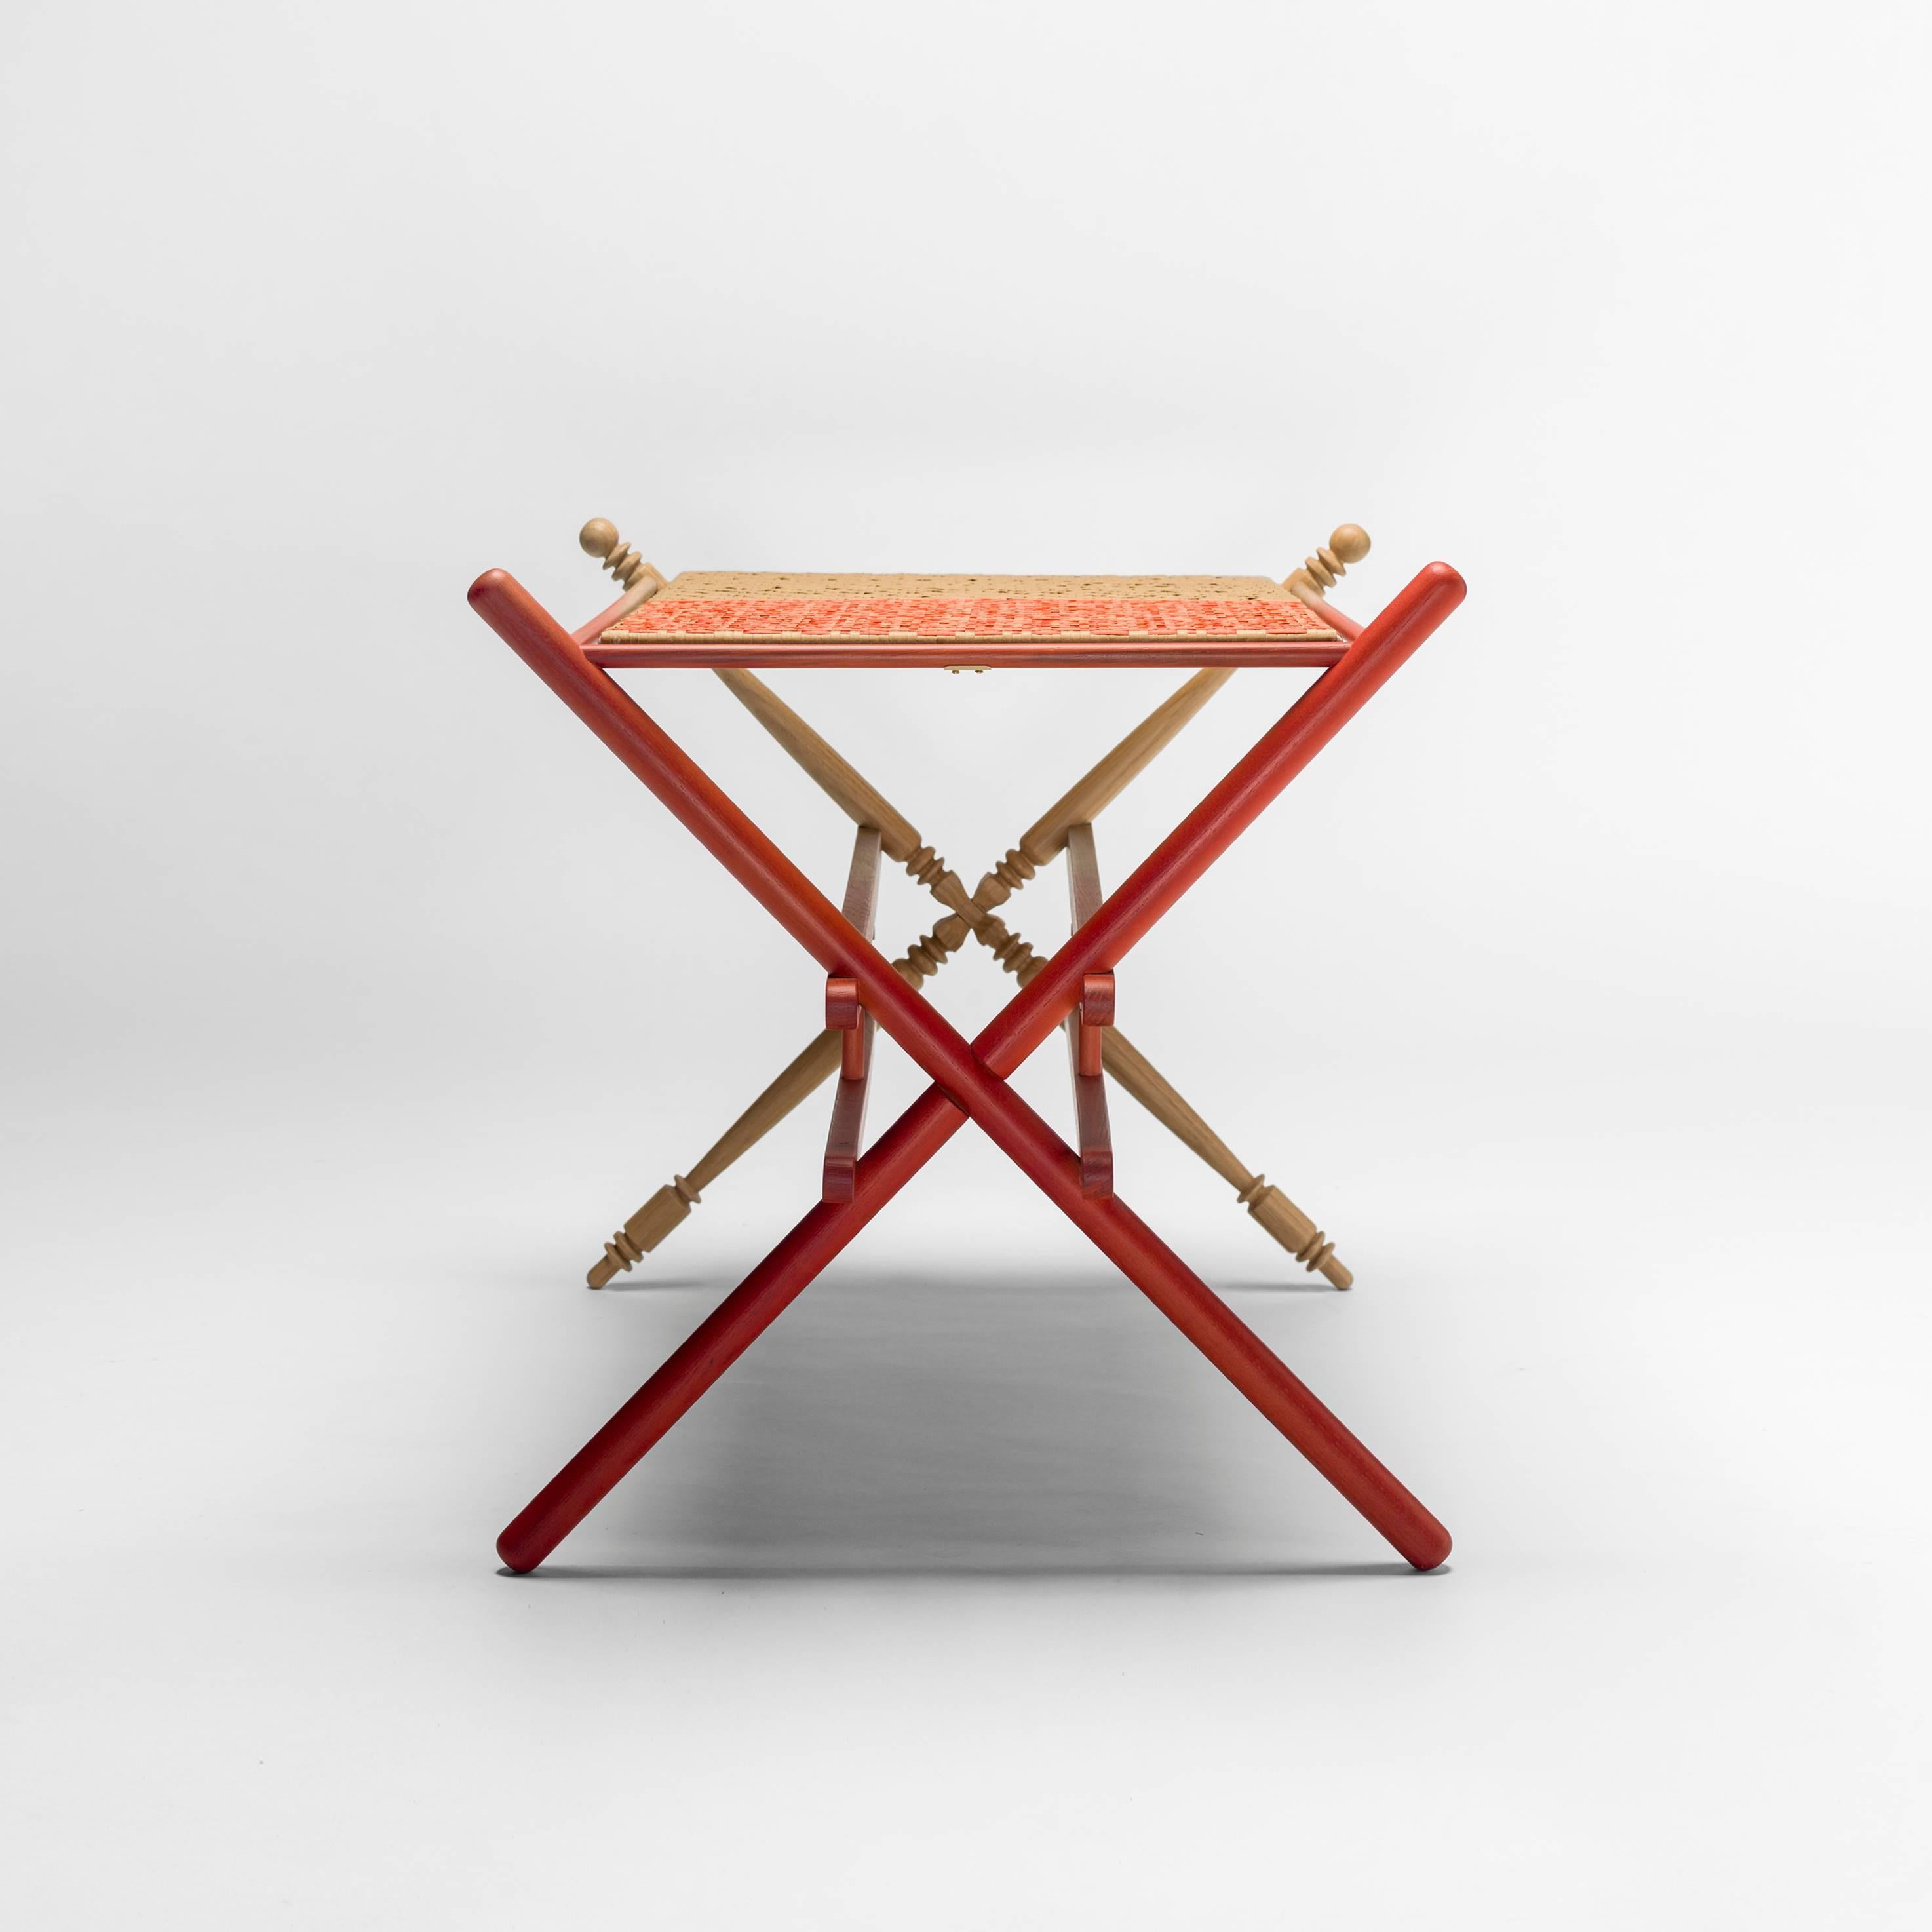 Solid oak structure with degraded red finish and tray made
with craft paper and red textile ribbon.

Limited Edition of eight units and two artist proofs and two prototypes.

Measures: 88 x 63 x 62 H cm.

Available now, this piece was placed